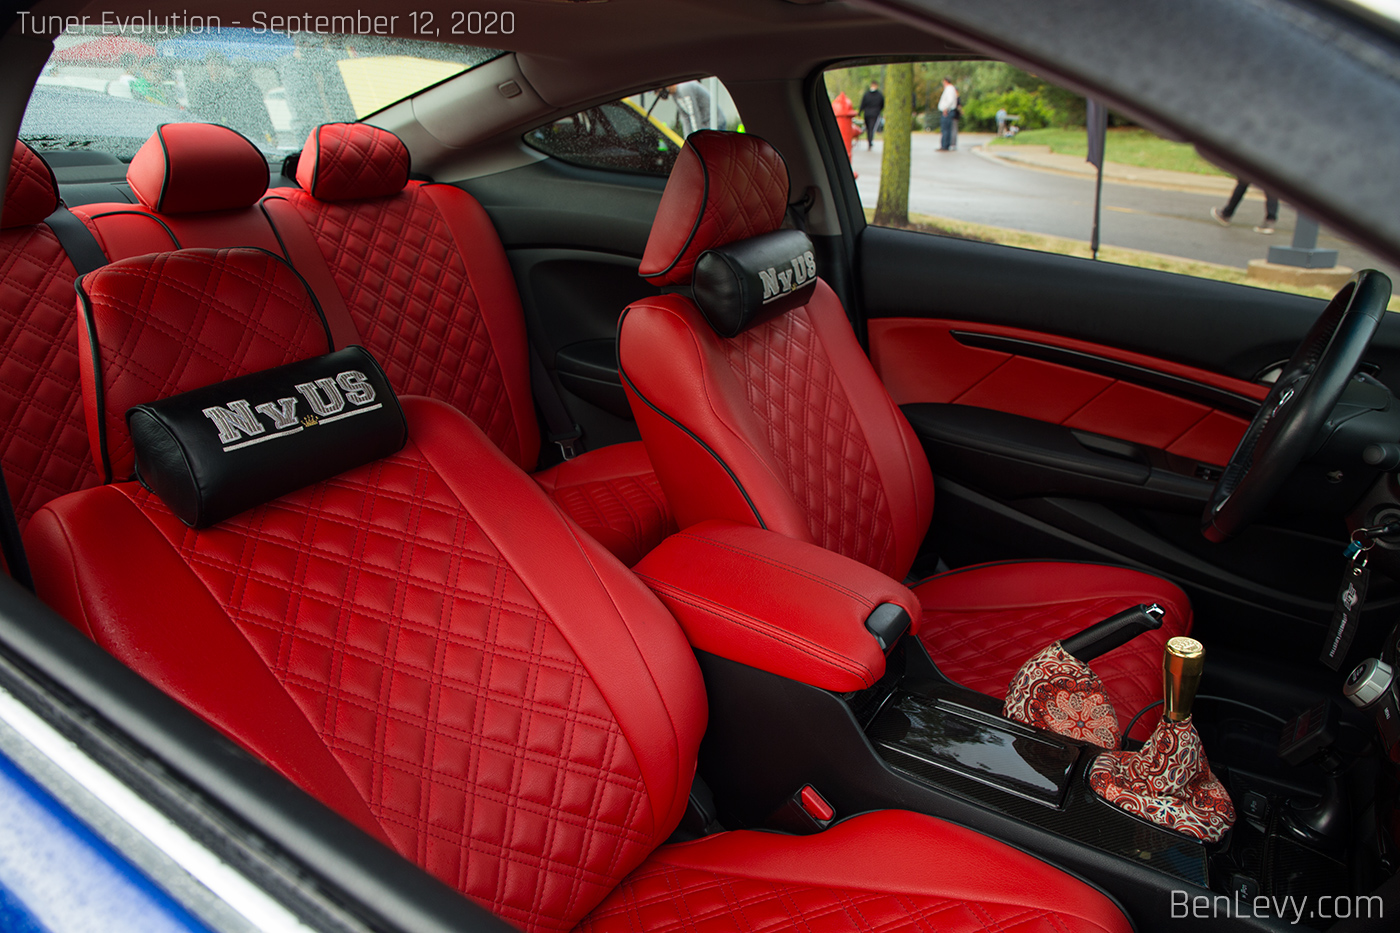 Diamond-stiched red, leather seats in Honda Accord